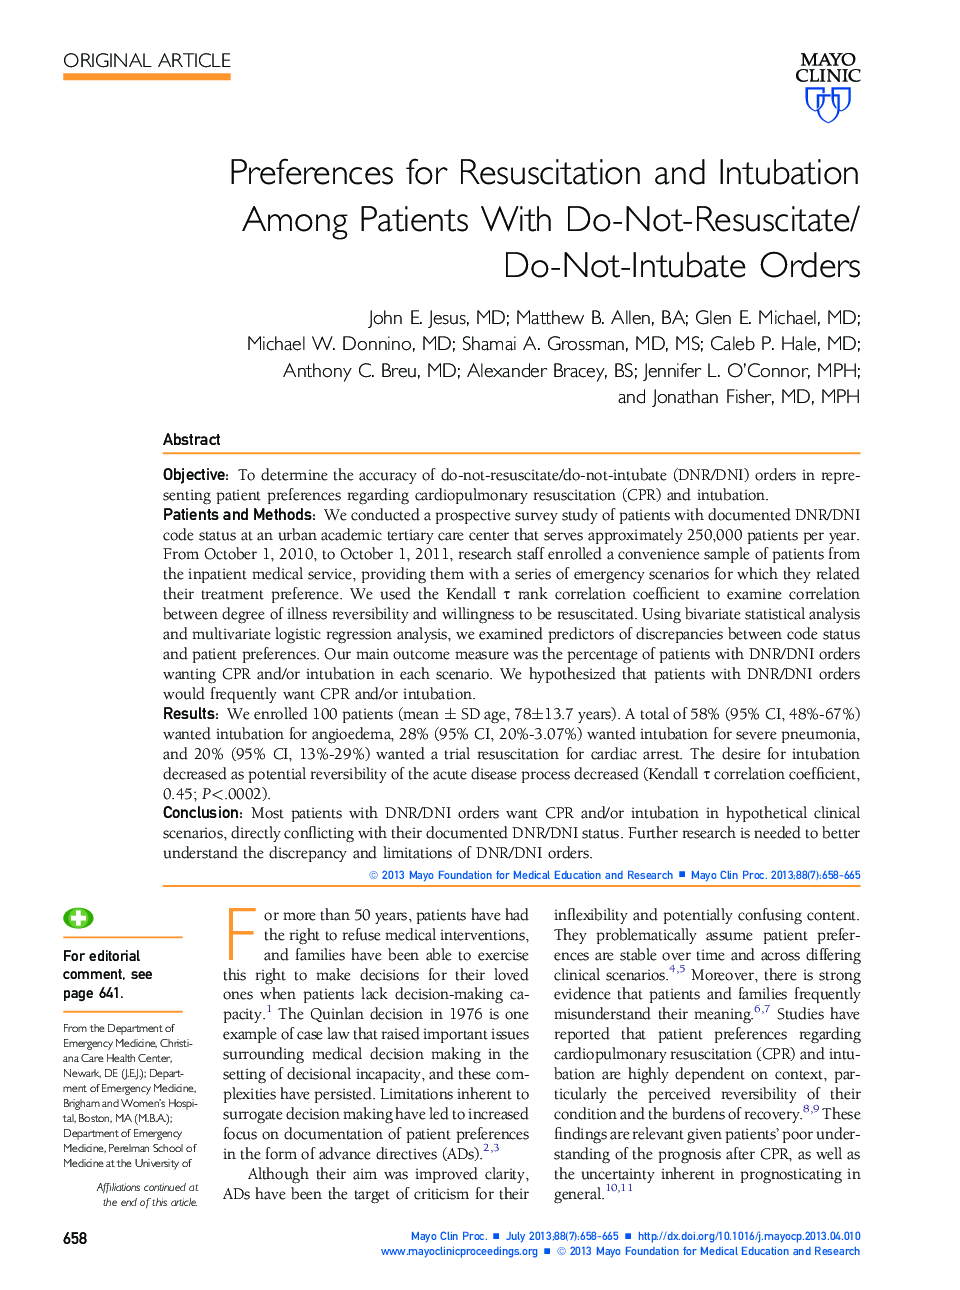 Preferences for Resuscitation and Intubation Among Patients With Do-Not-Resuscitate/Do-Not-Intubate Orders